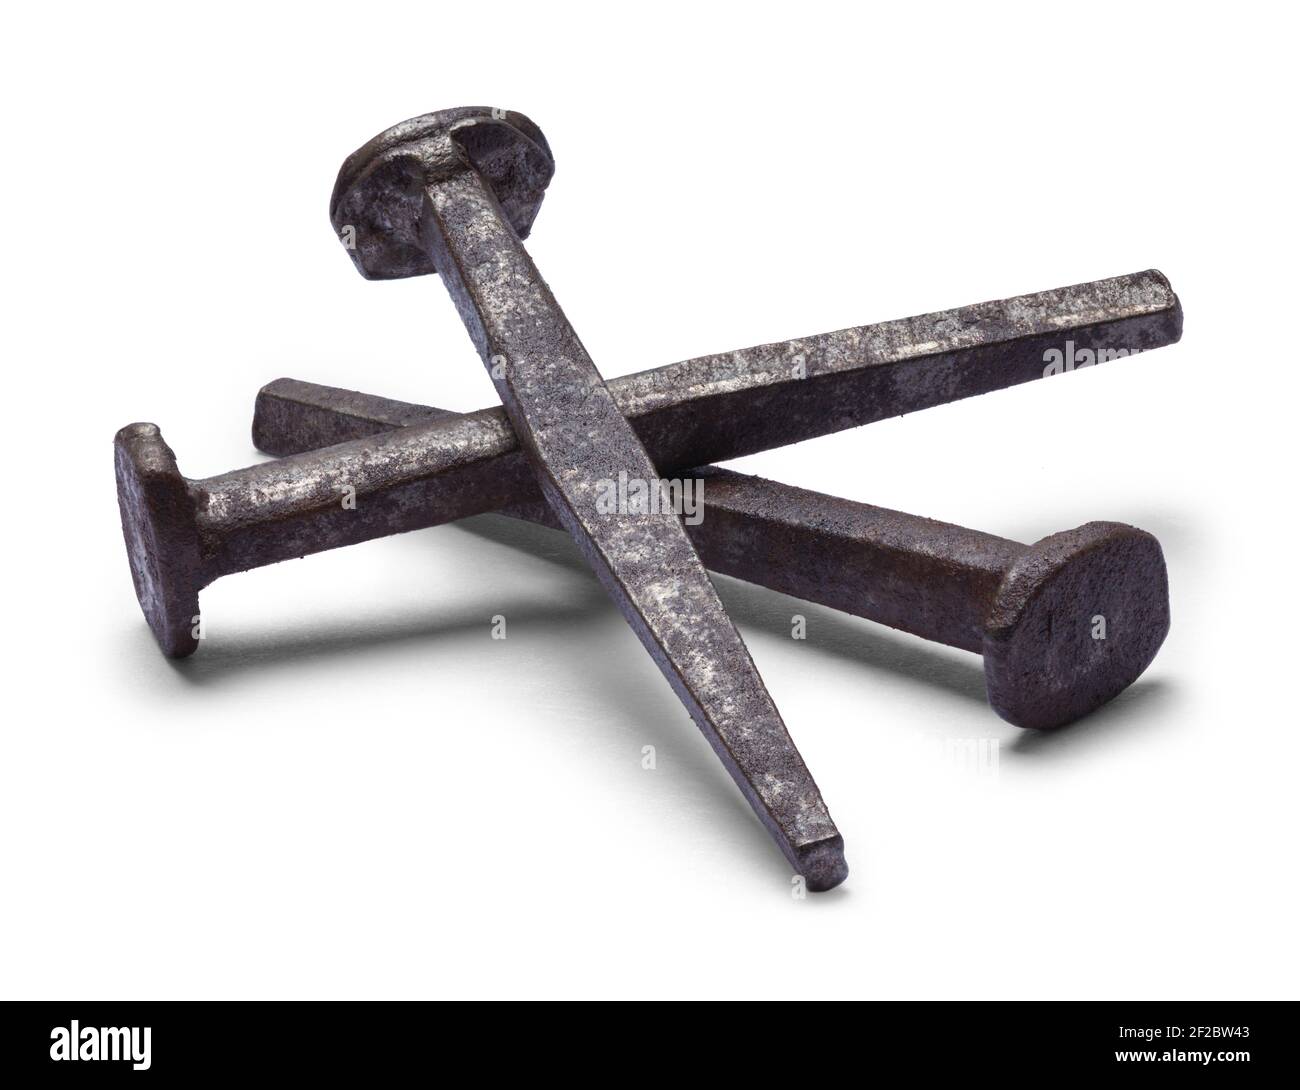 Pile of Old Rusty Nails Cut Out. Stock Photo